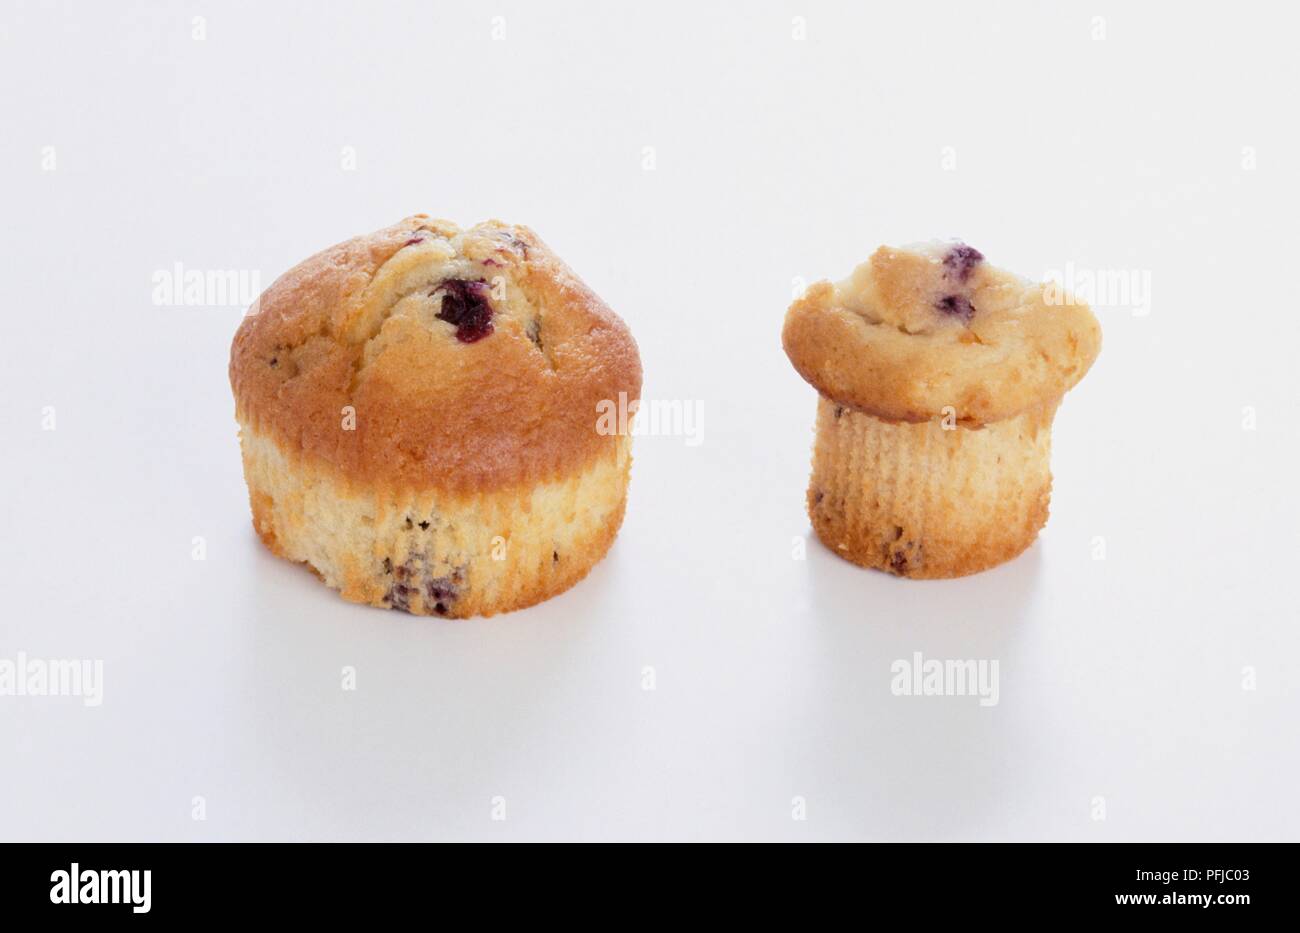 Large blueberry muffin next to small blueberry muffin Stock Photo